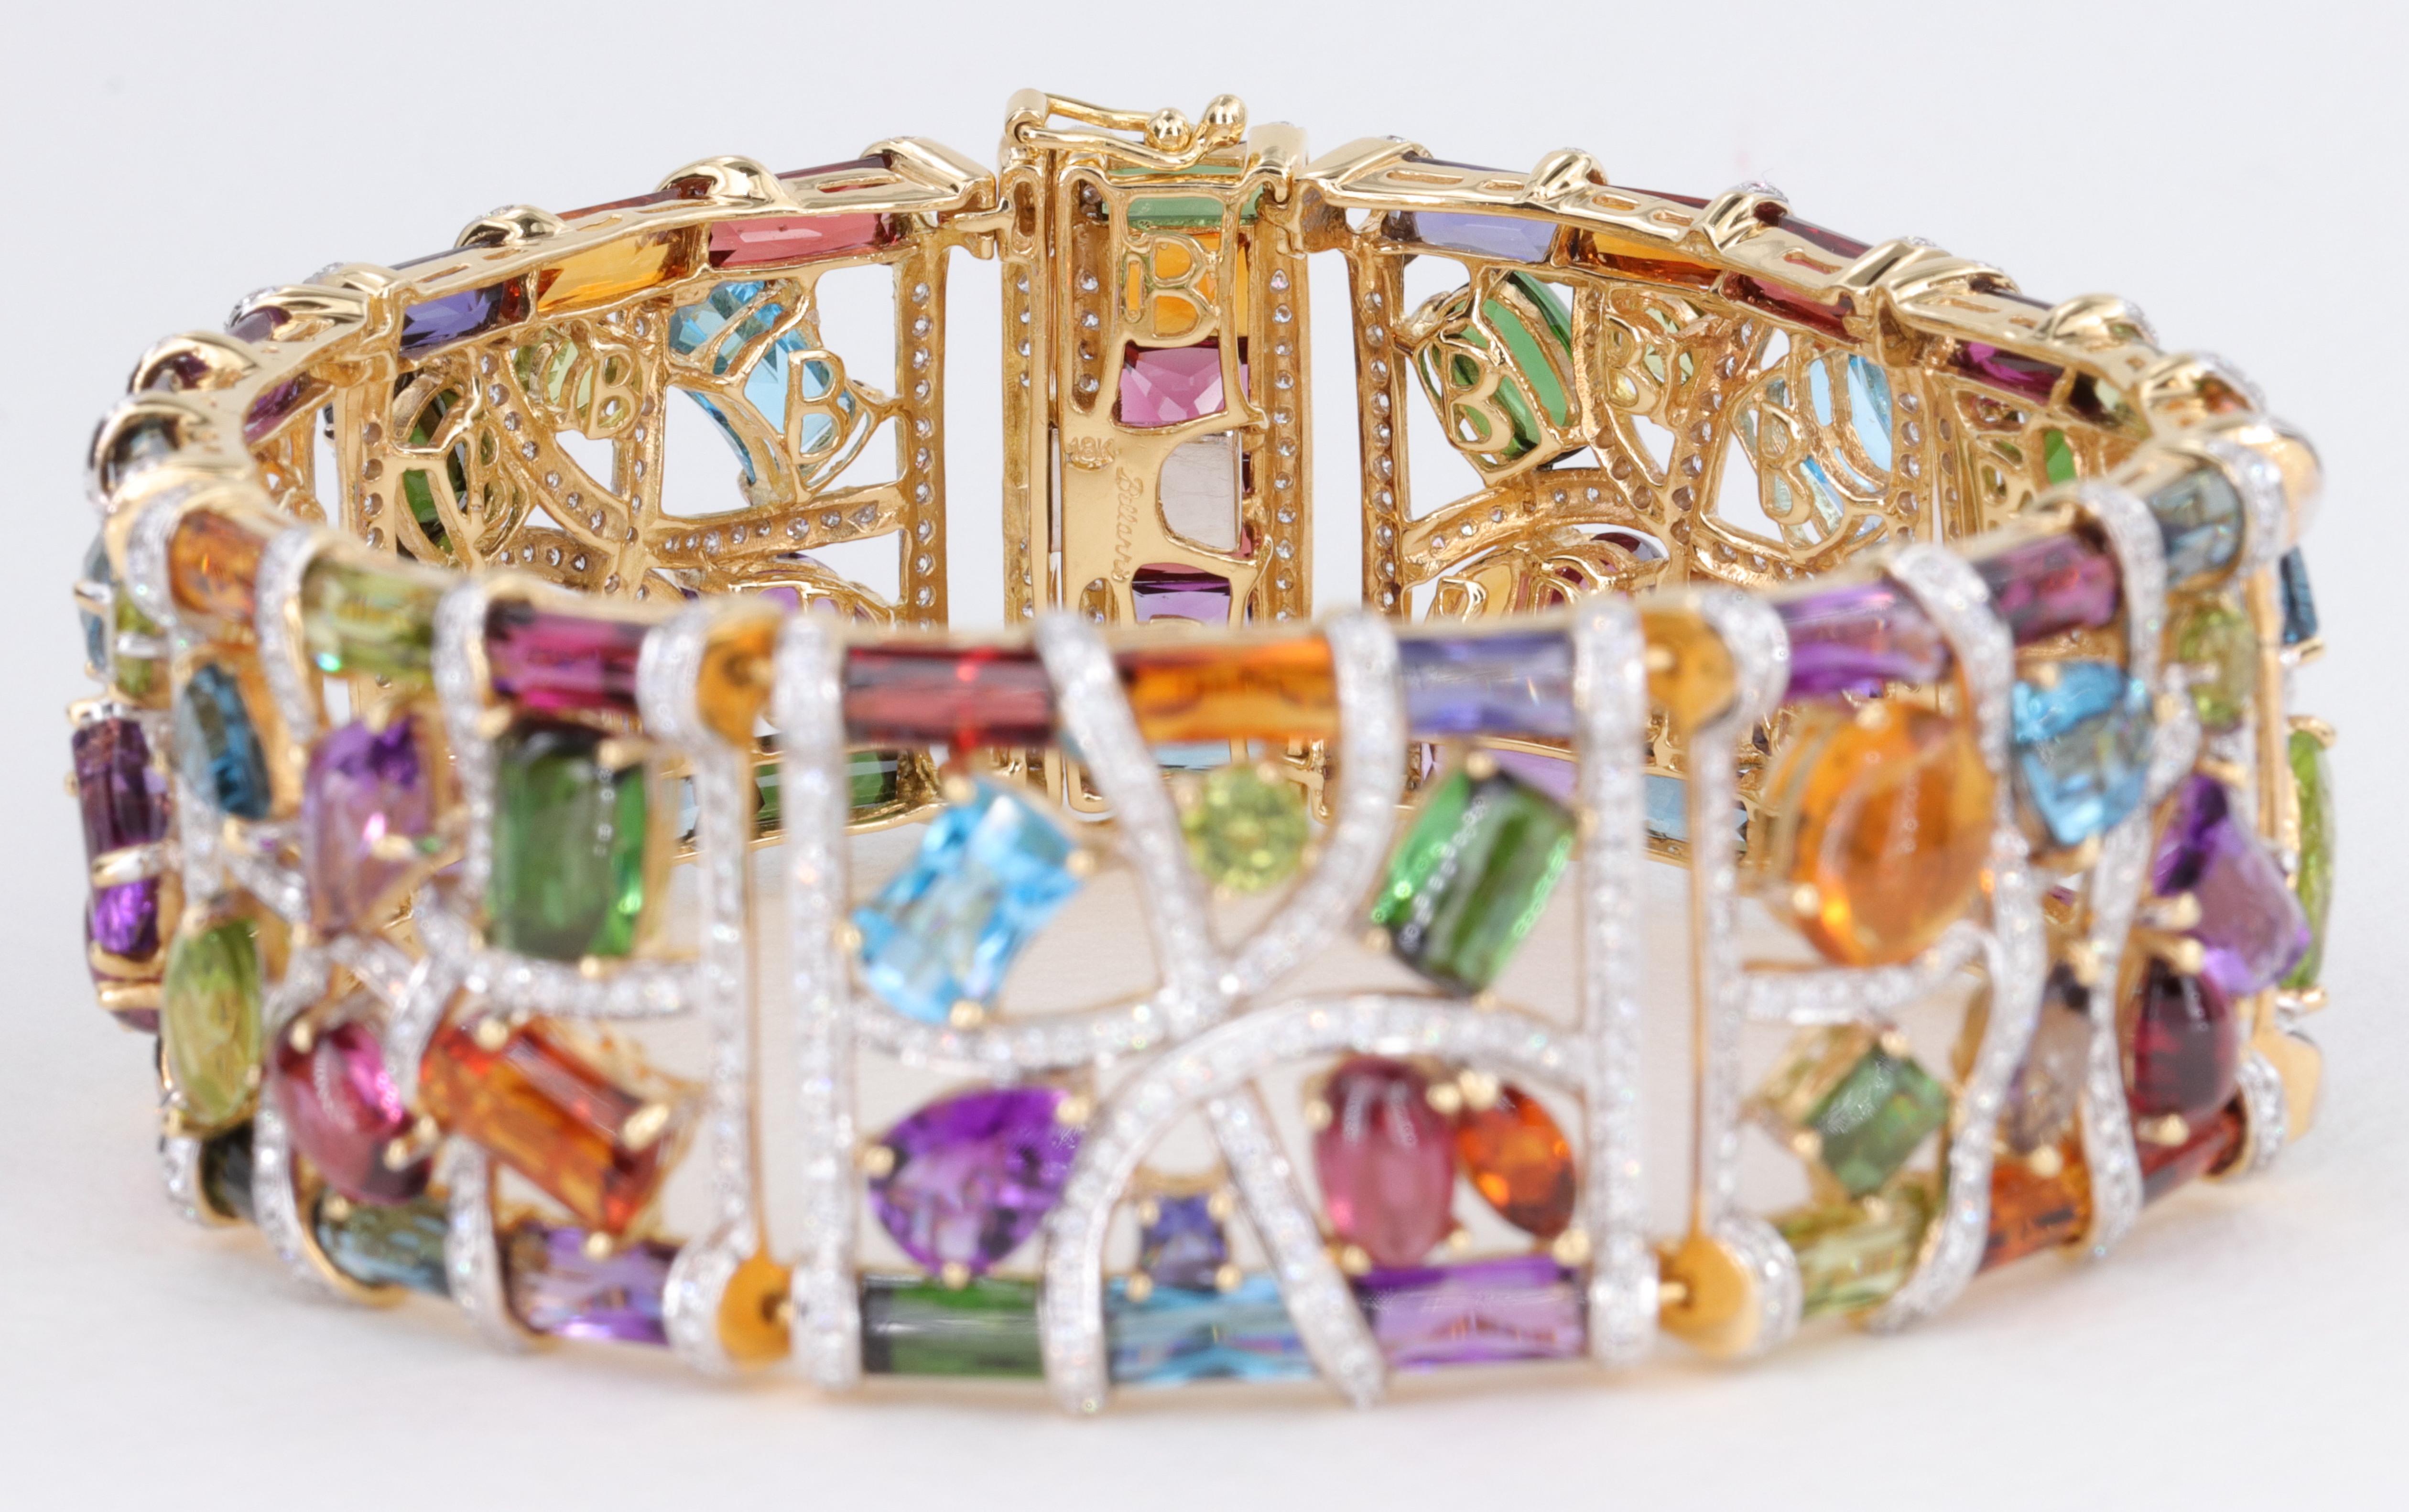 Limited Edition Bellarri Bracelet From The Marquesa Collection

Award Winning Design from Bellarri Jewelry, The Marquesa Collection. The Bracelet is Set in 18k Yellow Gold and Contains Approximately 2.85 carats of Diamonds and 56 carats of Gemstones